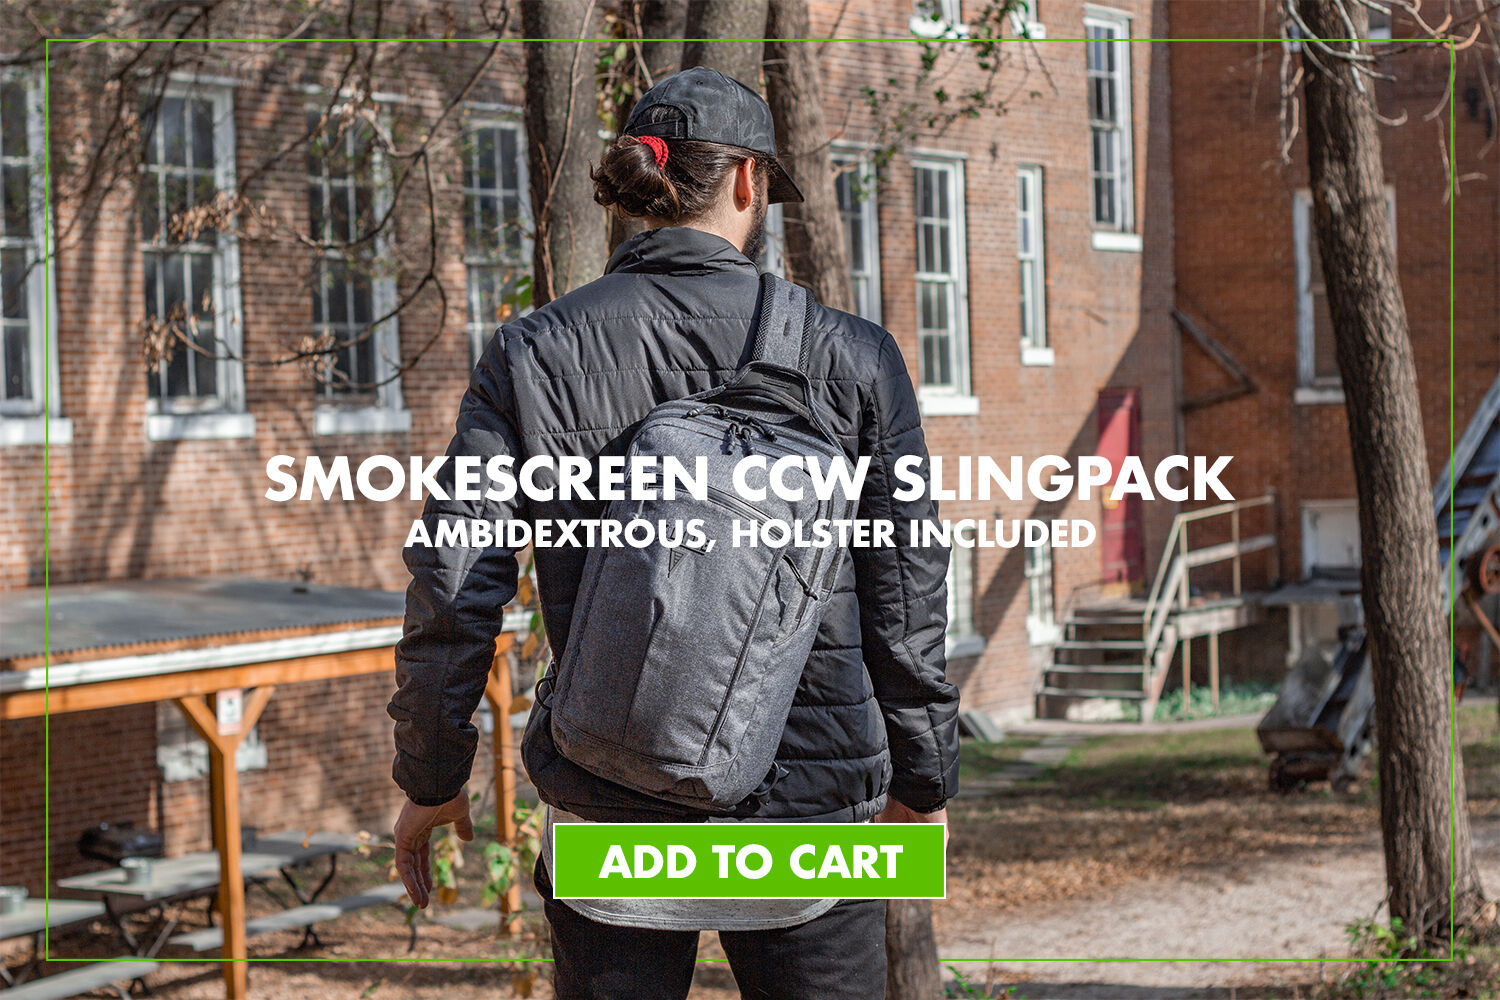 Elite Survival Smokescreen CCW Slingpack - Compact and versatile concealed carry sling pack